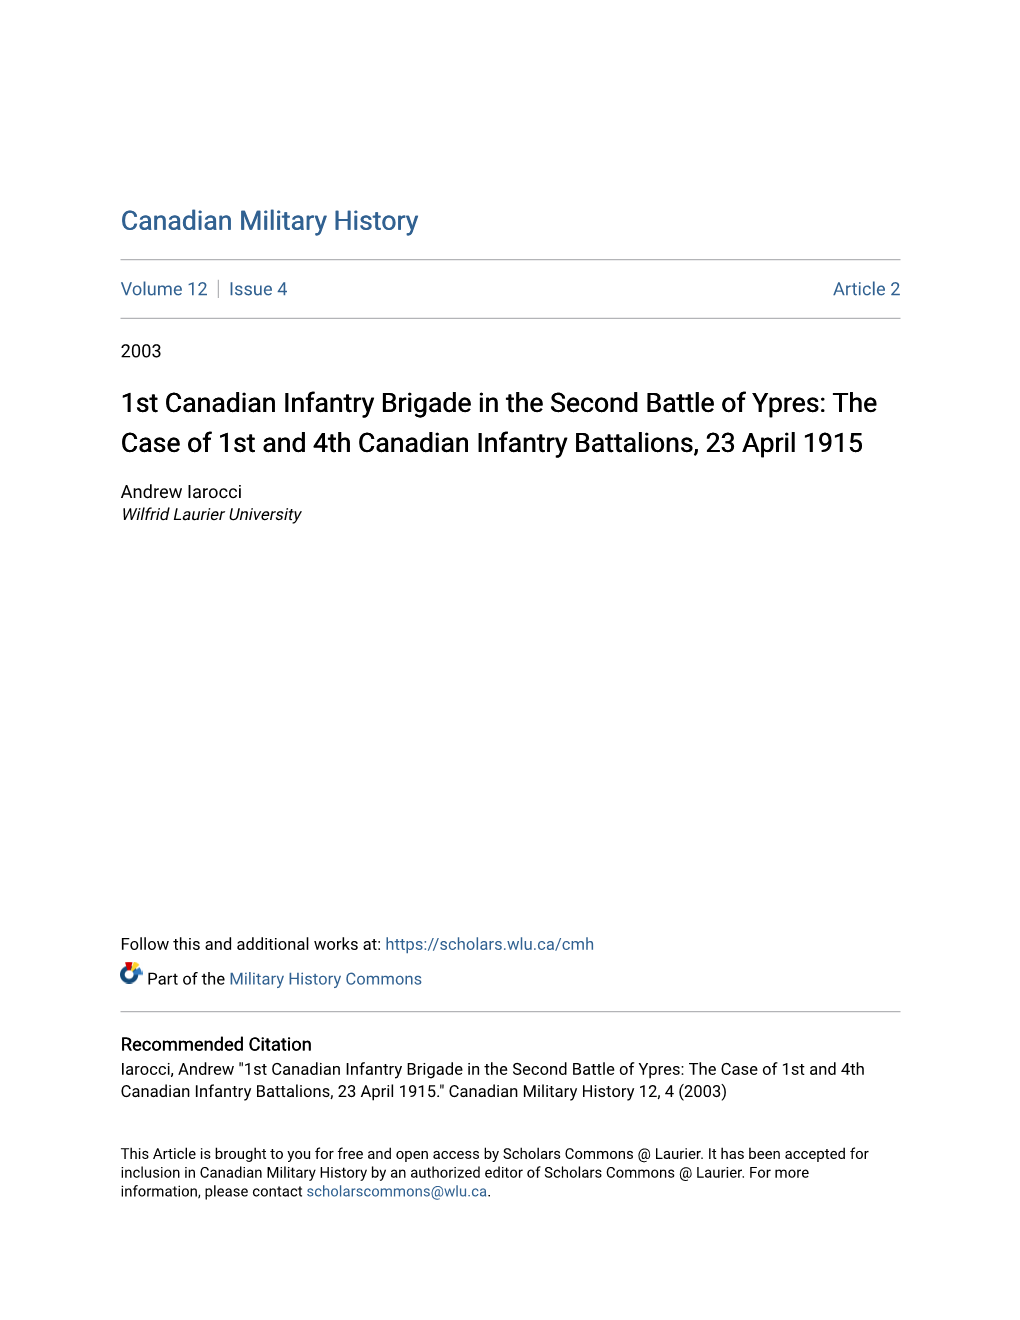 1St Canadian Infantry Brigade in the Second Battle of Ypres: the Case of 1St and 4Th Canadian Infantry Battalions, 23 April 1915